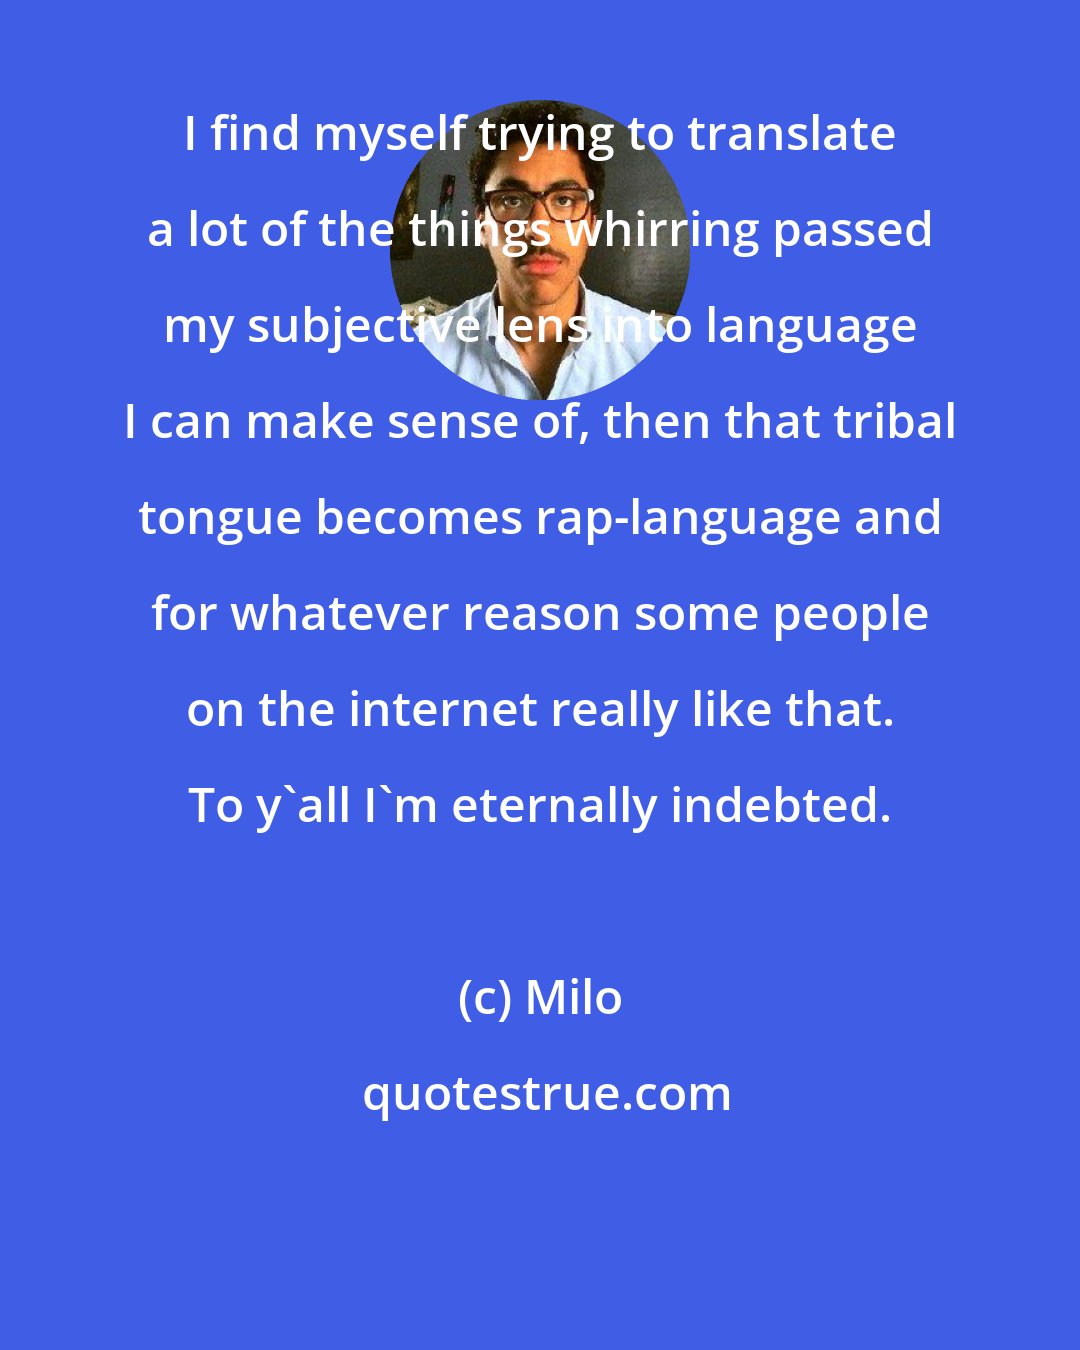 Milo: I find myself trying to translate a lot of the things whirring passed my subjective lens into language I can make sense of, then that tribal tongue becomes rap-language and for whatever reason some people on the internet really like that. To y'all I'm eternally indebted.